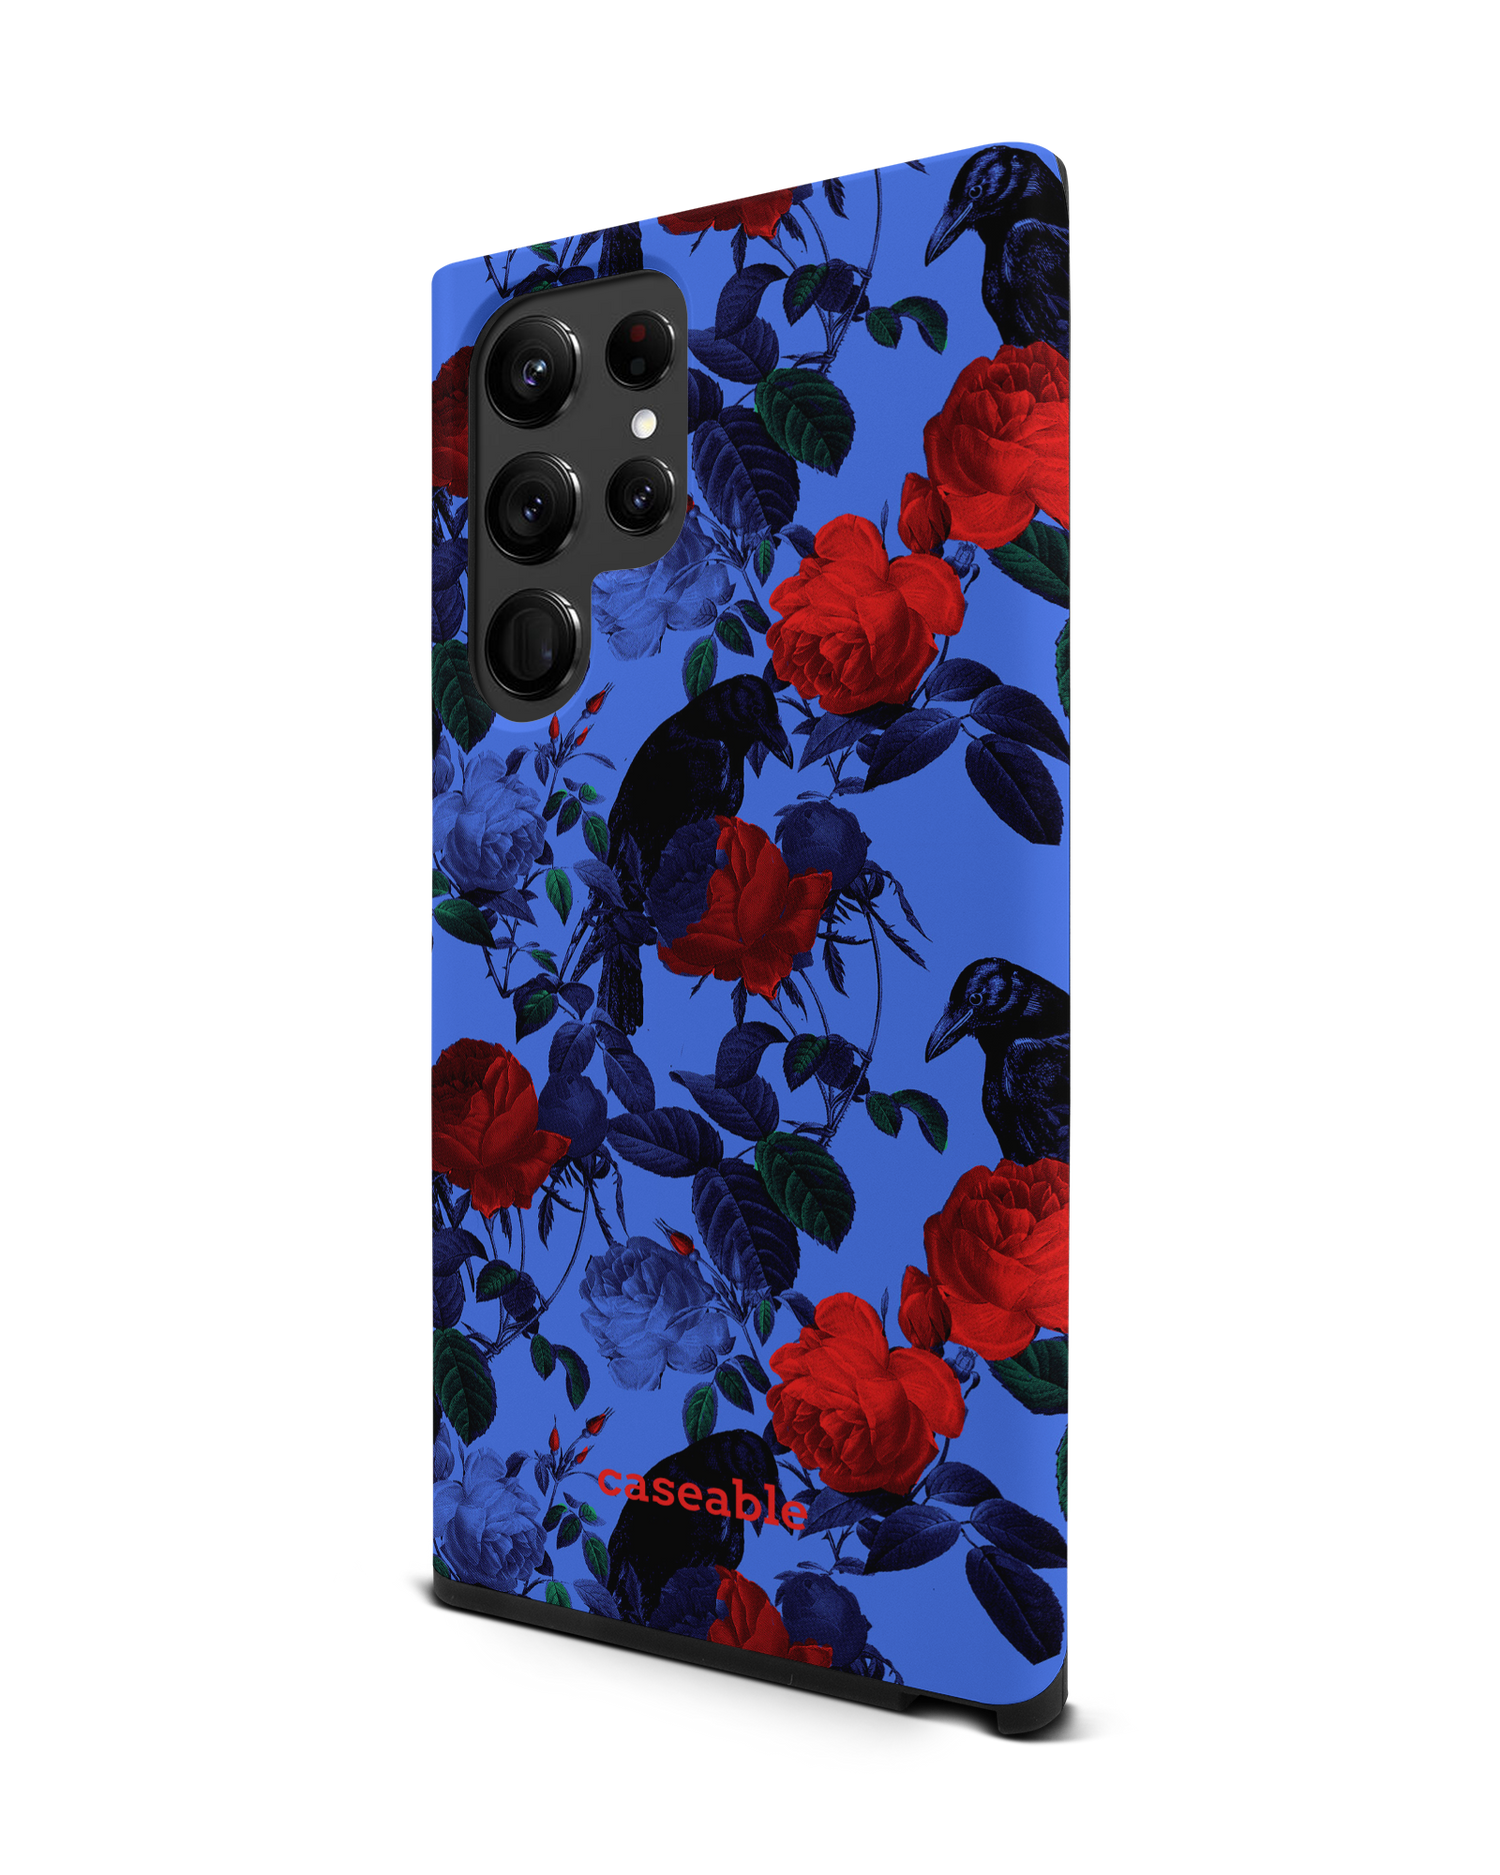 Roses And Ravens Premium Phone Case Samsung Galaxy S22 Ultra 5G: View from the right side